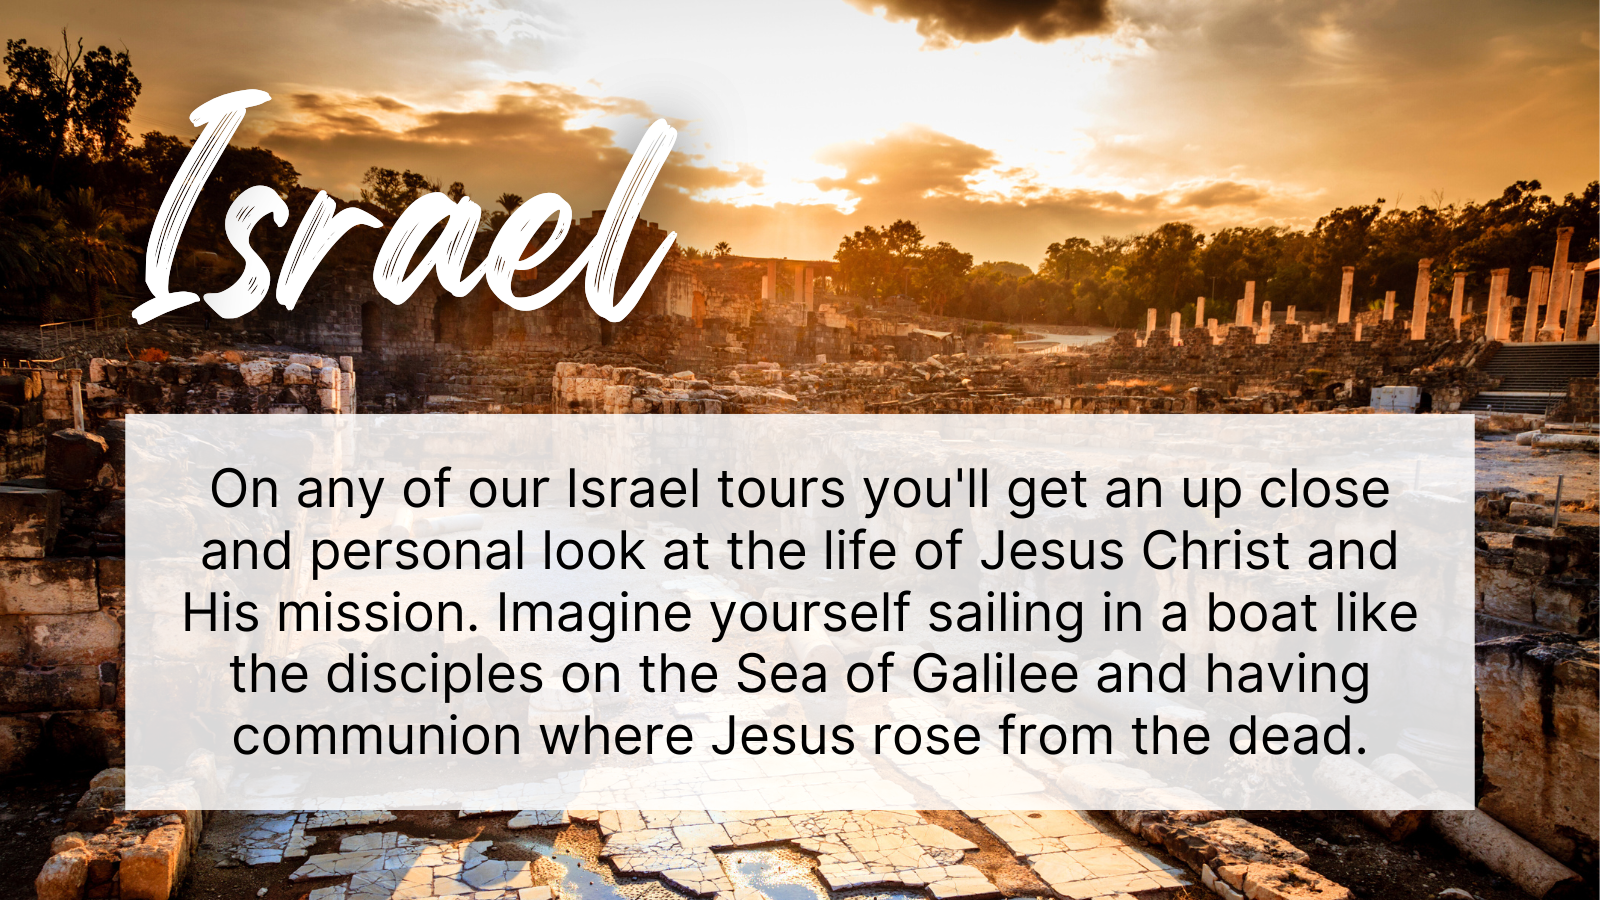 On any of our Israel tours you'll get an up close and personal look at the life of Jesus Christ and His mission. Imagine yourself sailing in a boat like the disciples on the Sea of Galilee and having communion where Jesus rose from the dead.